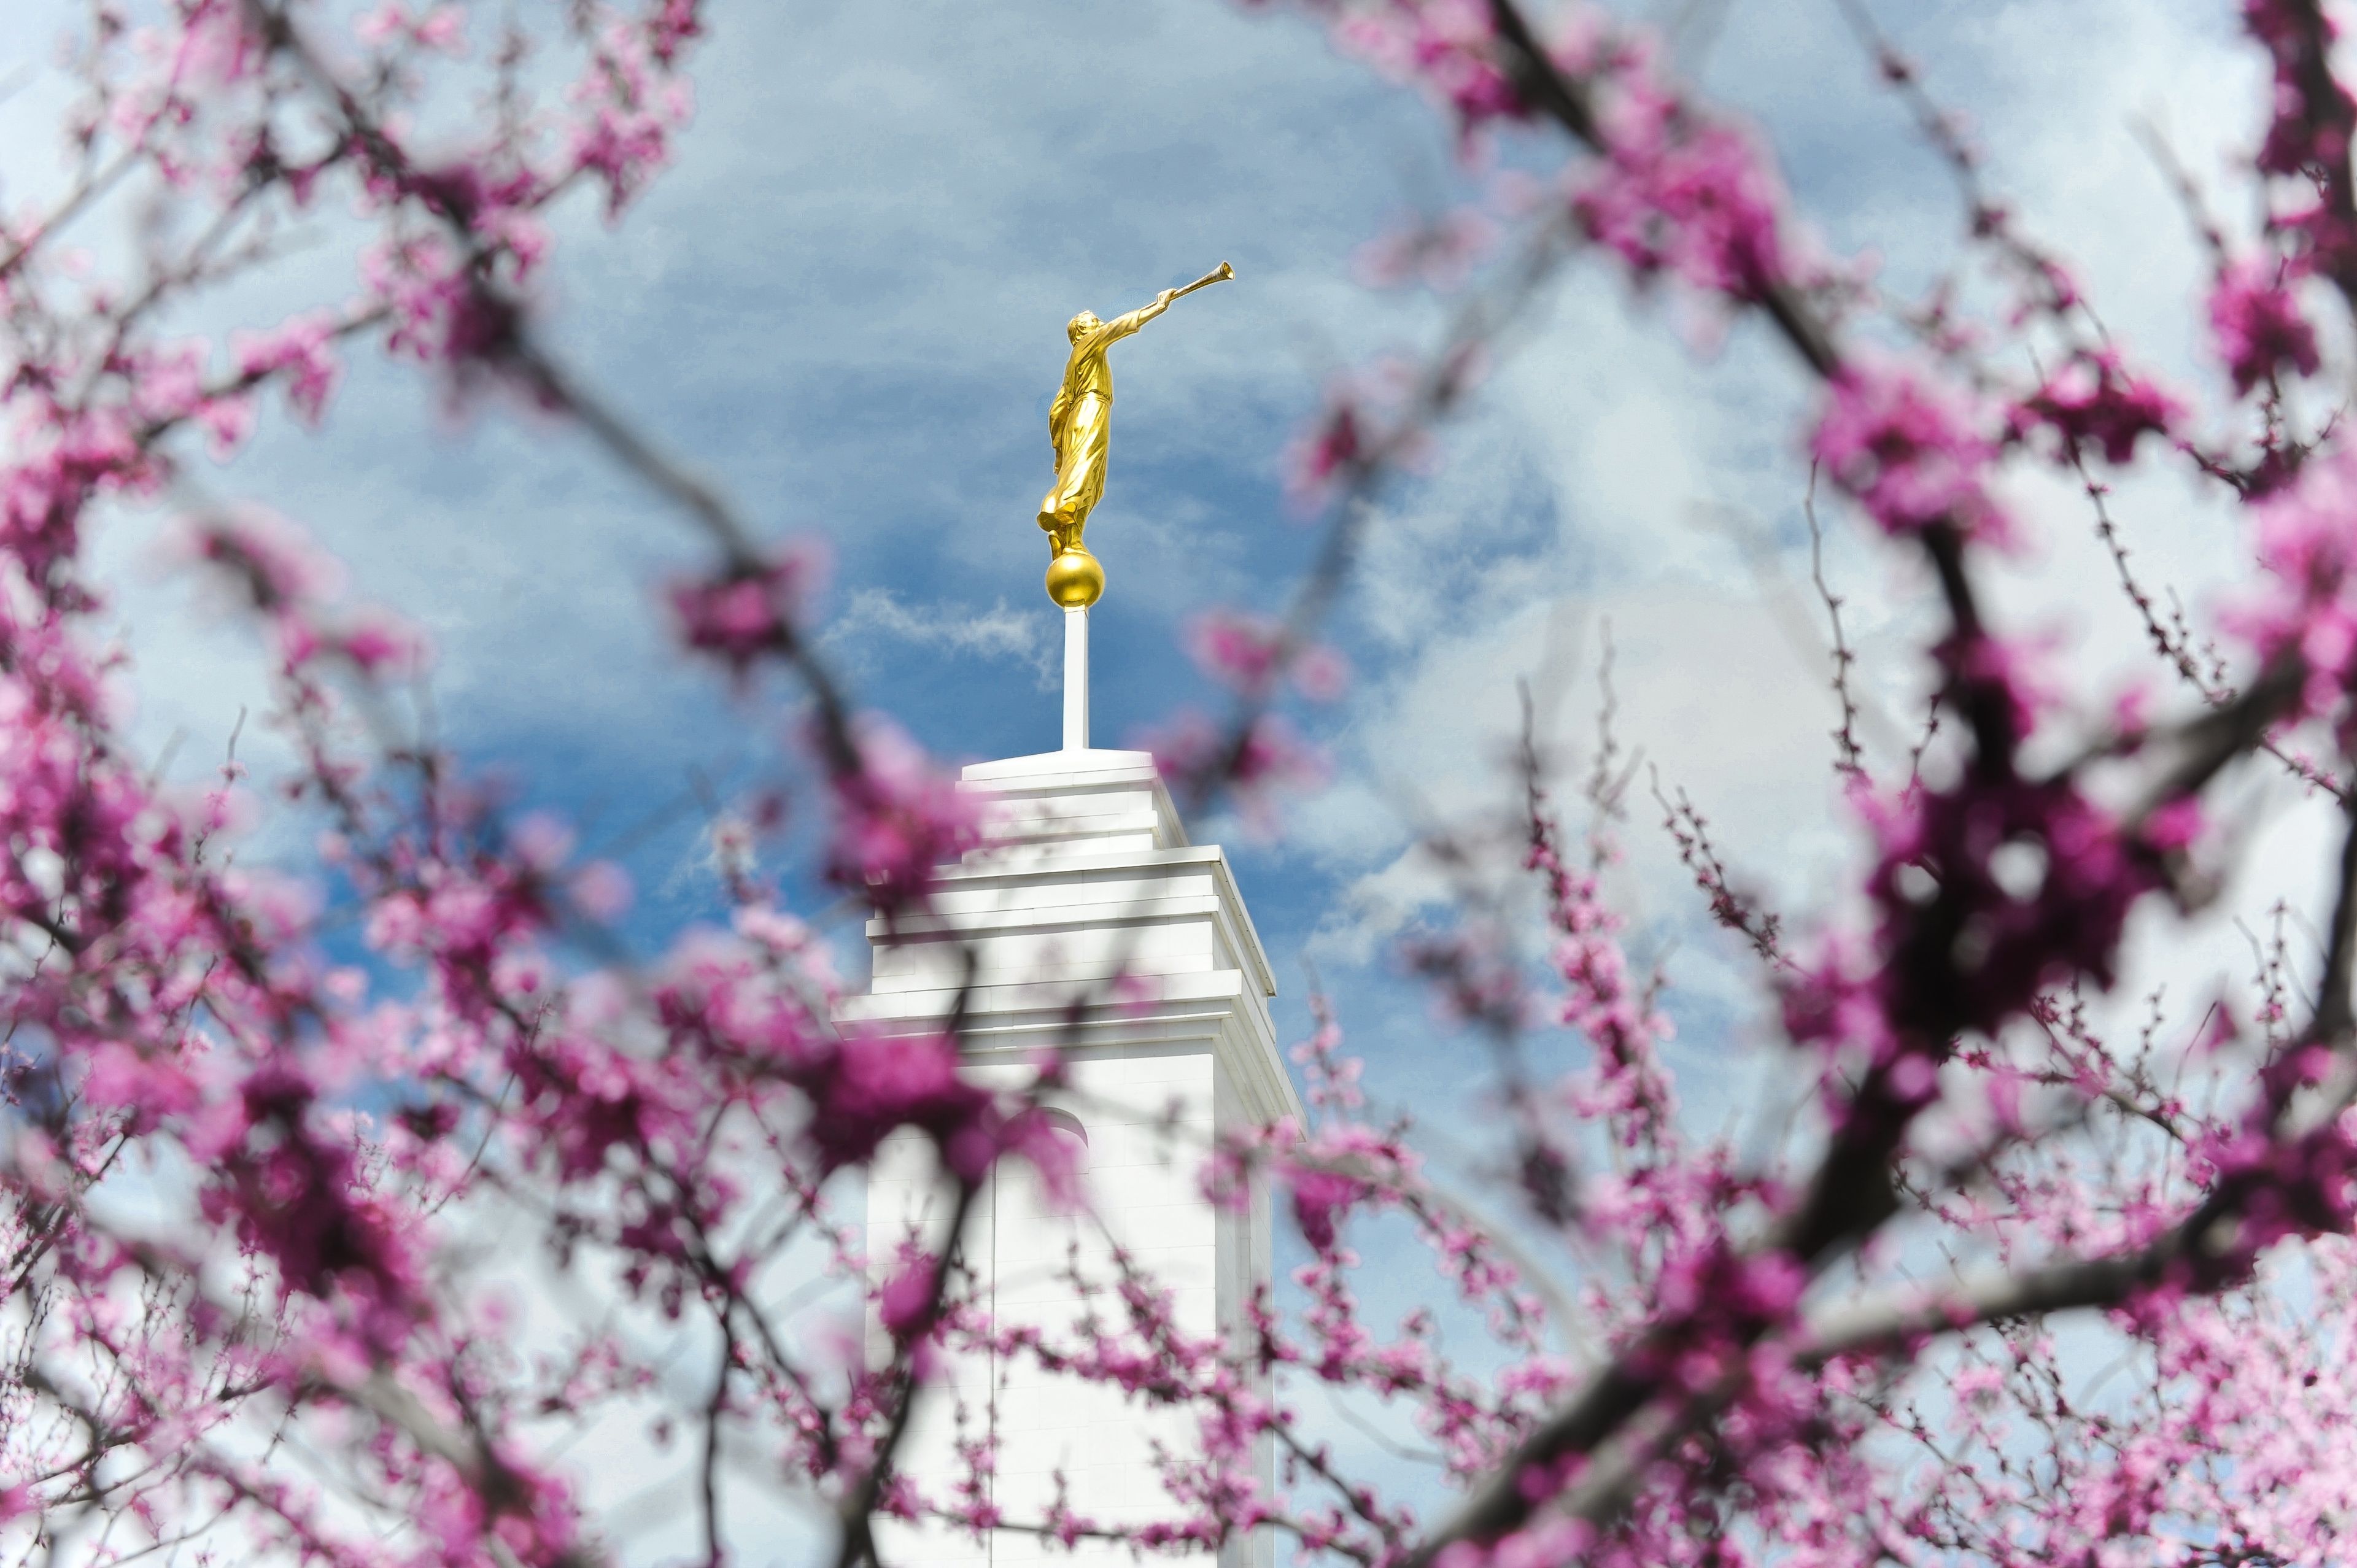 The spire of the Colonia Juárez Chihuahua Mexico Temple behind tree blossoms.